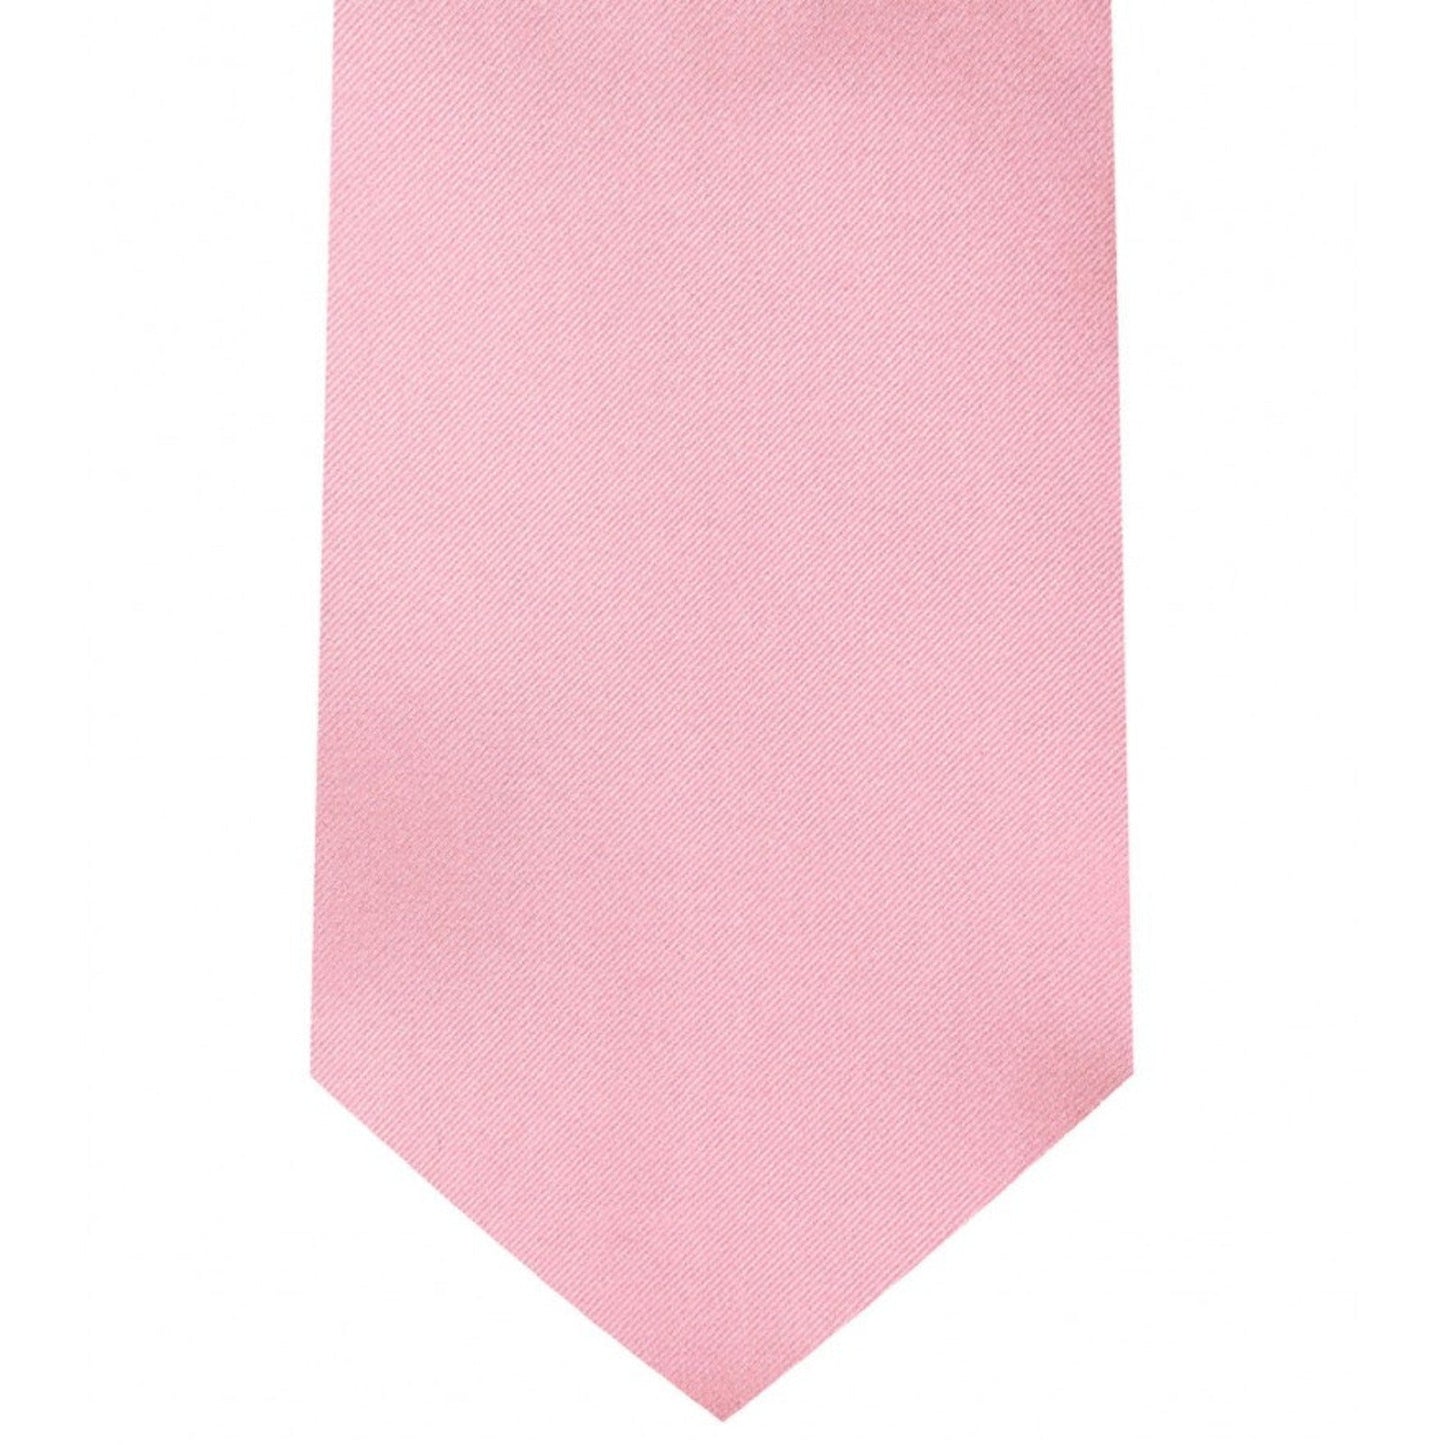 Classic Pink Tie Regular width 3.5 inches With Matching Pocket Square | KCT Menswear 